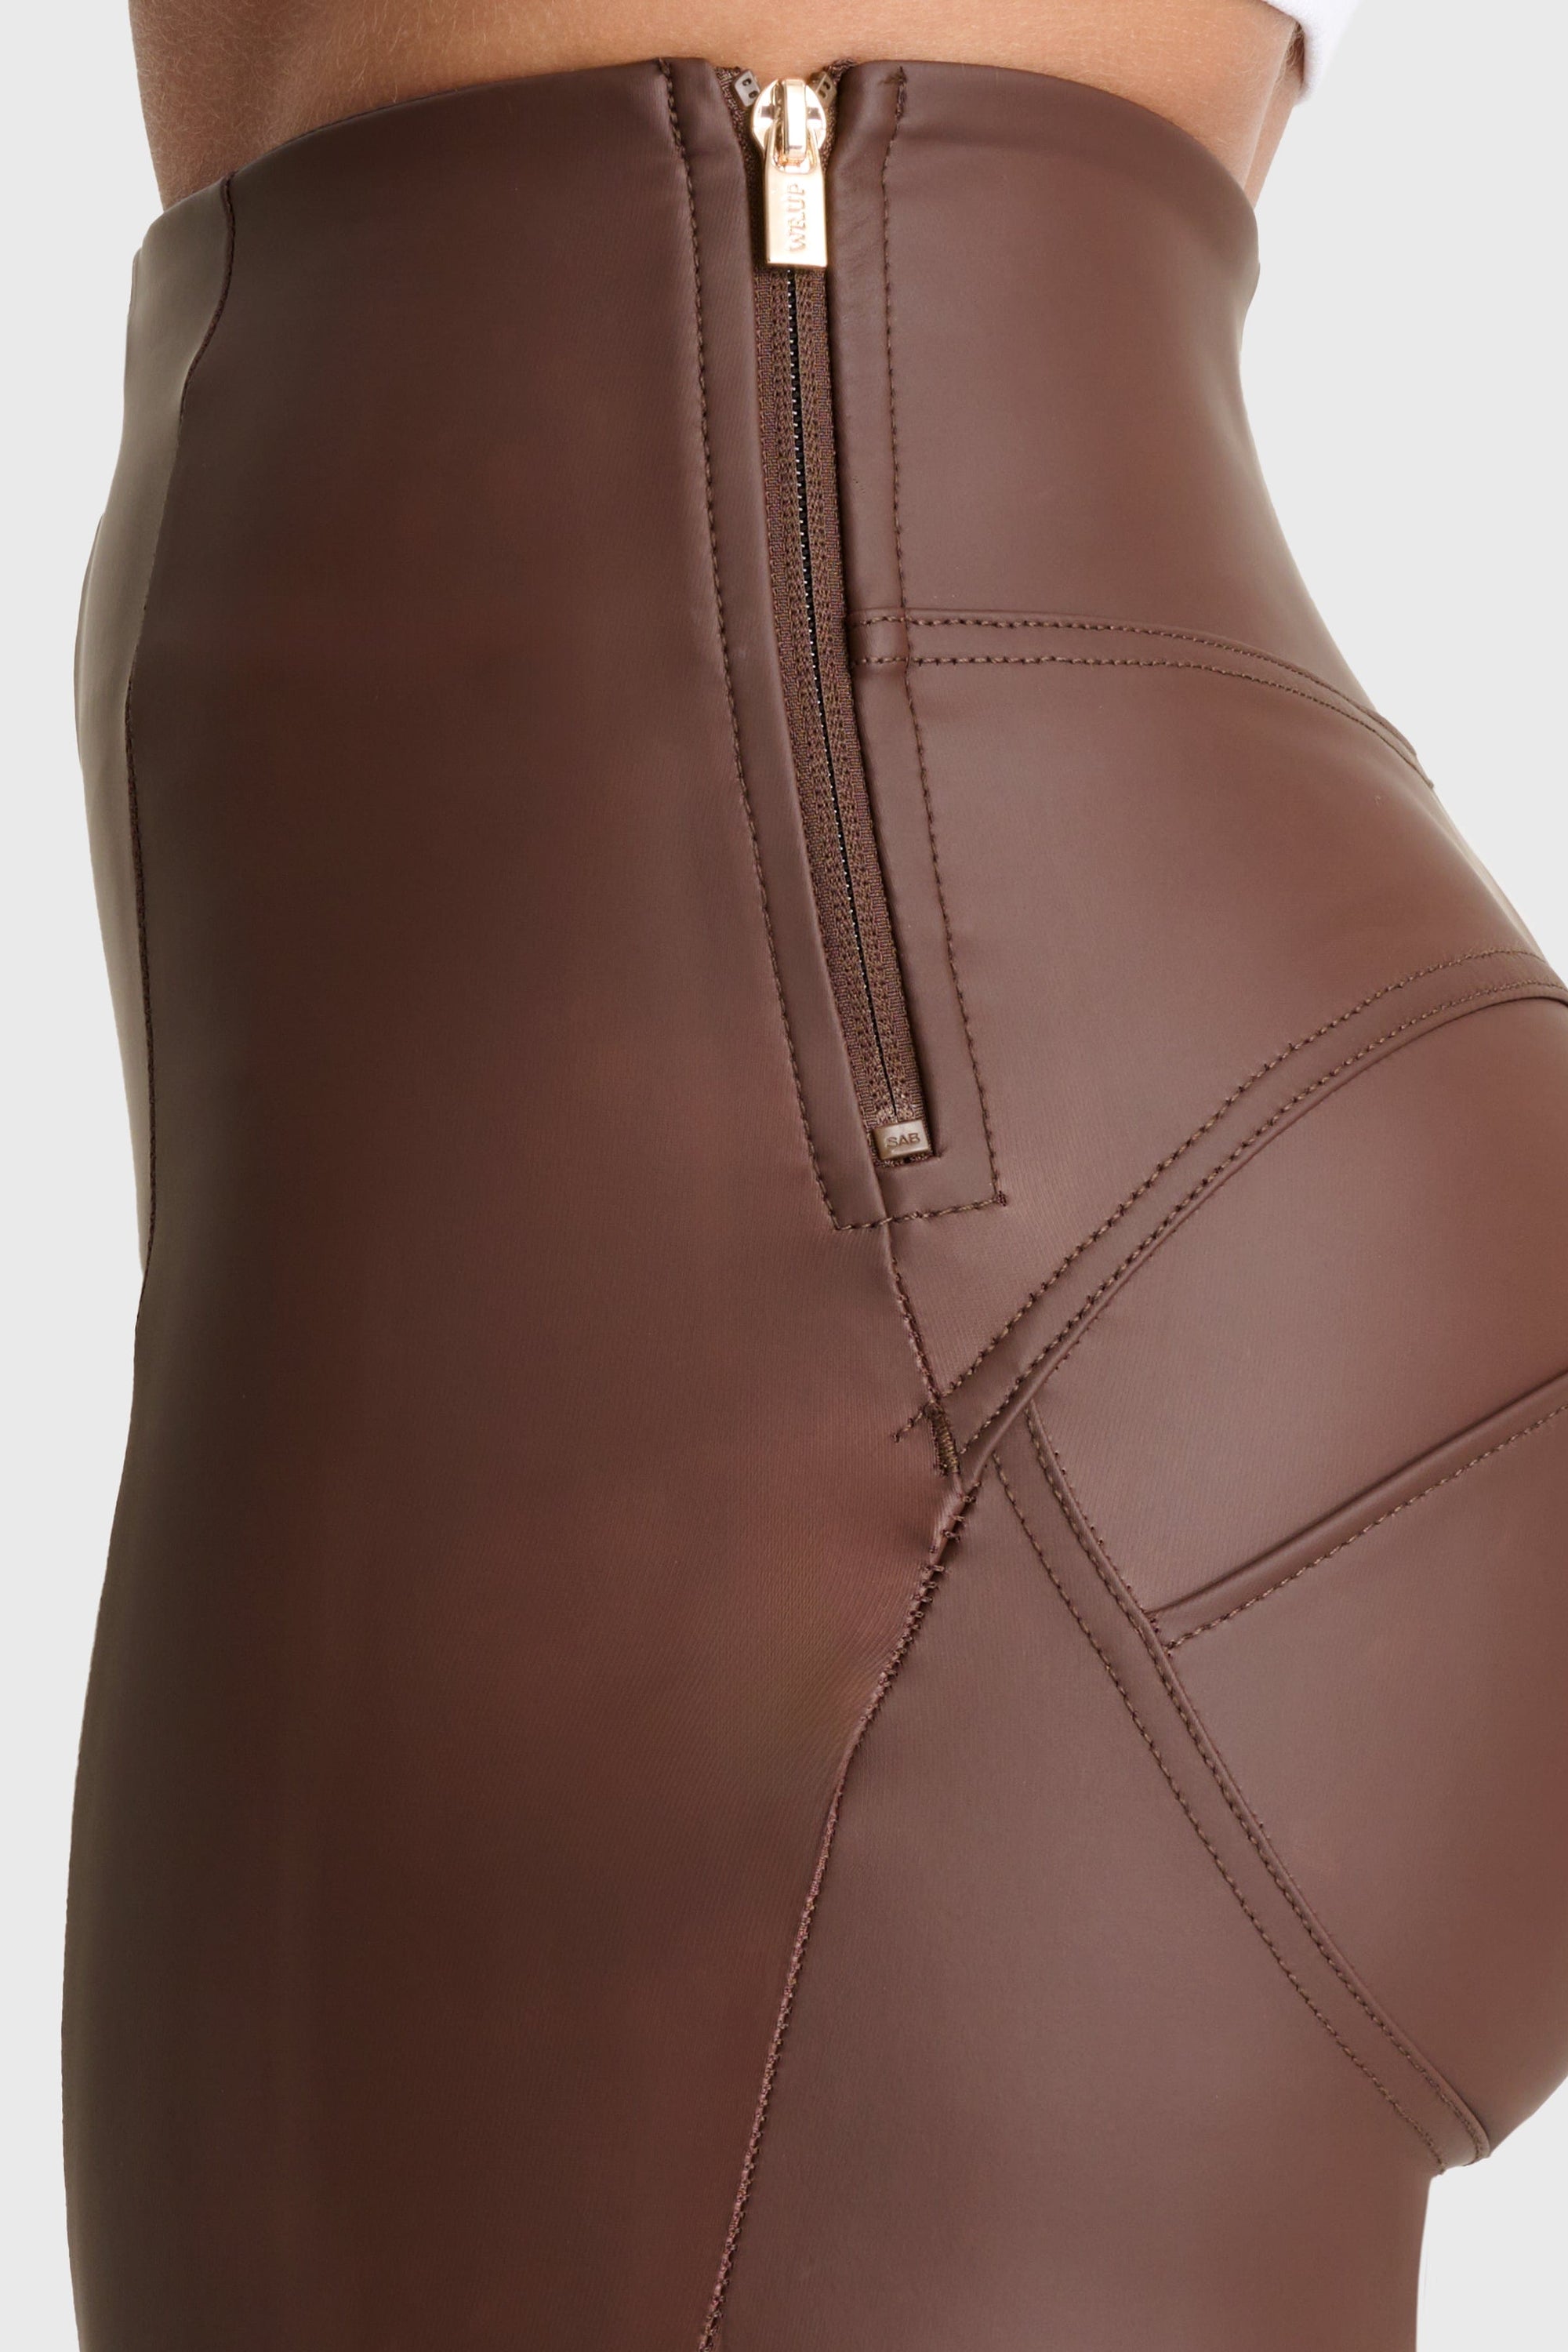 WR.UP®Faux Leather - Super High Waisted - Super Flare - Chocolate 9